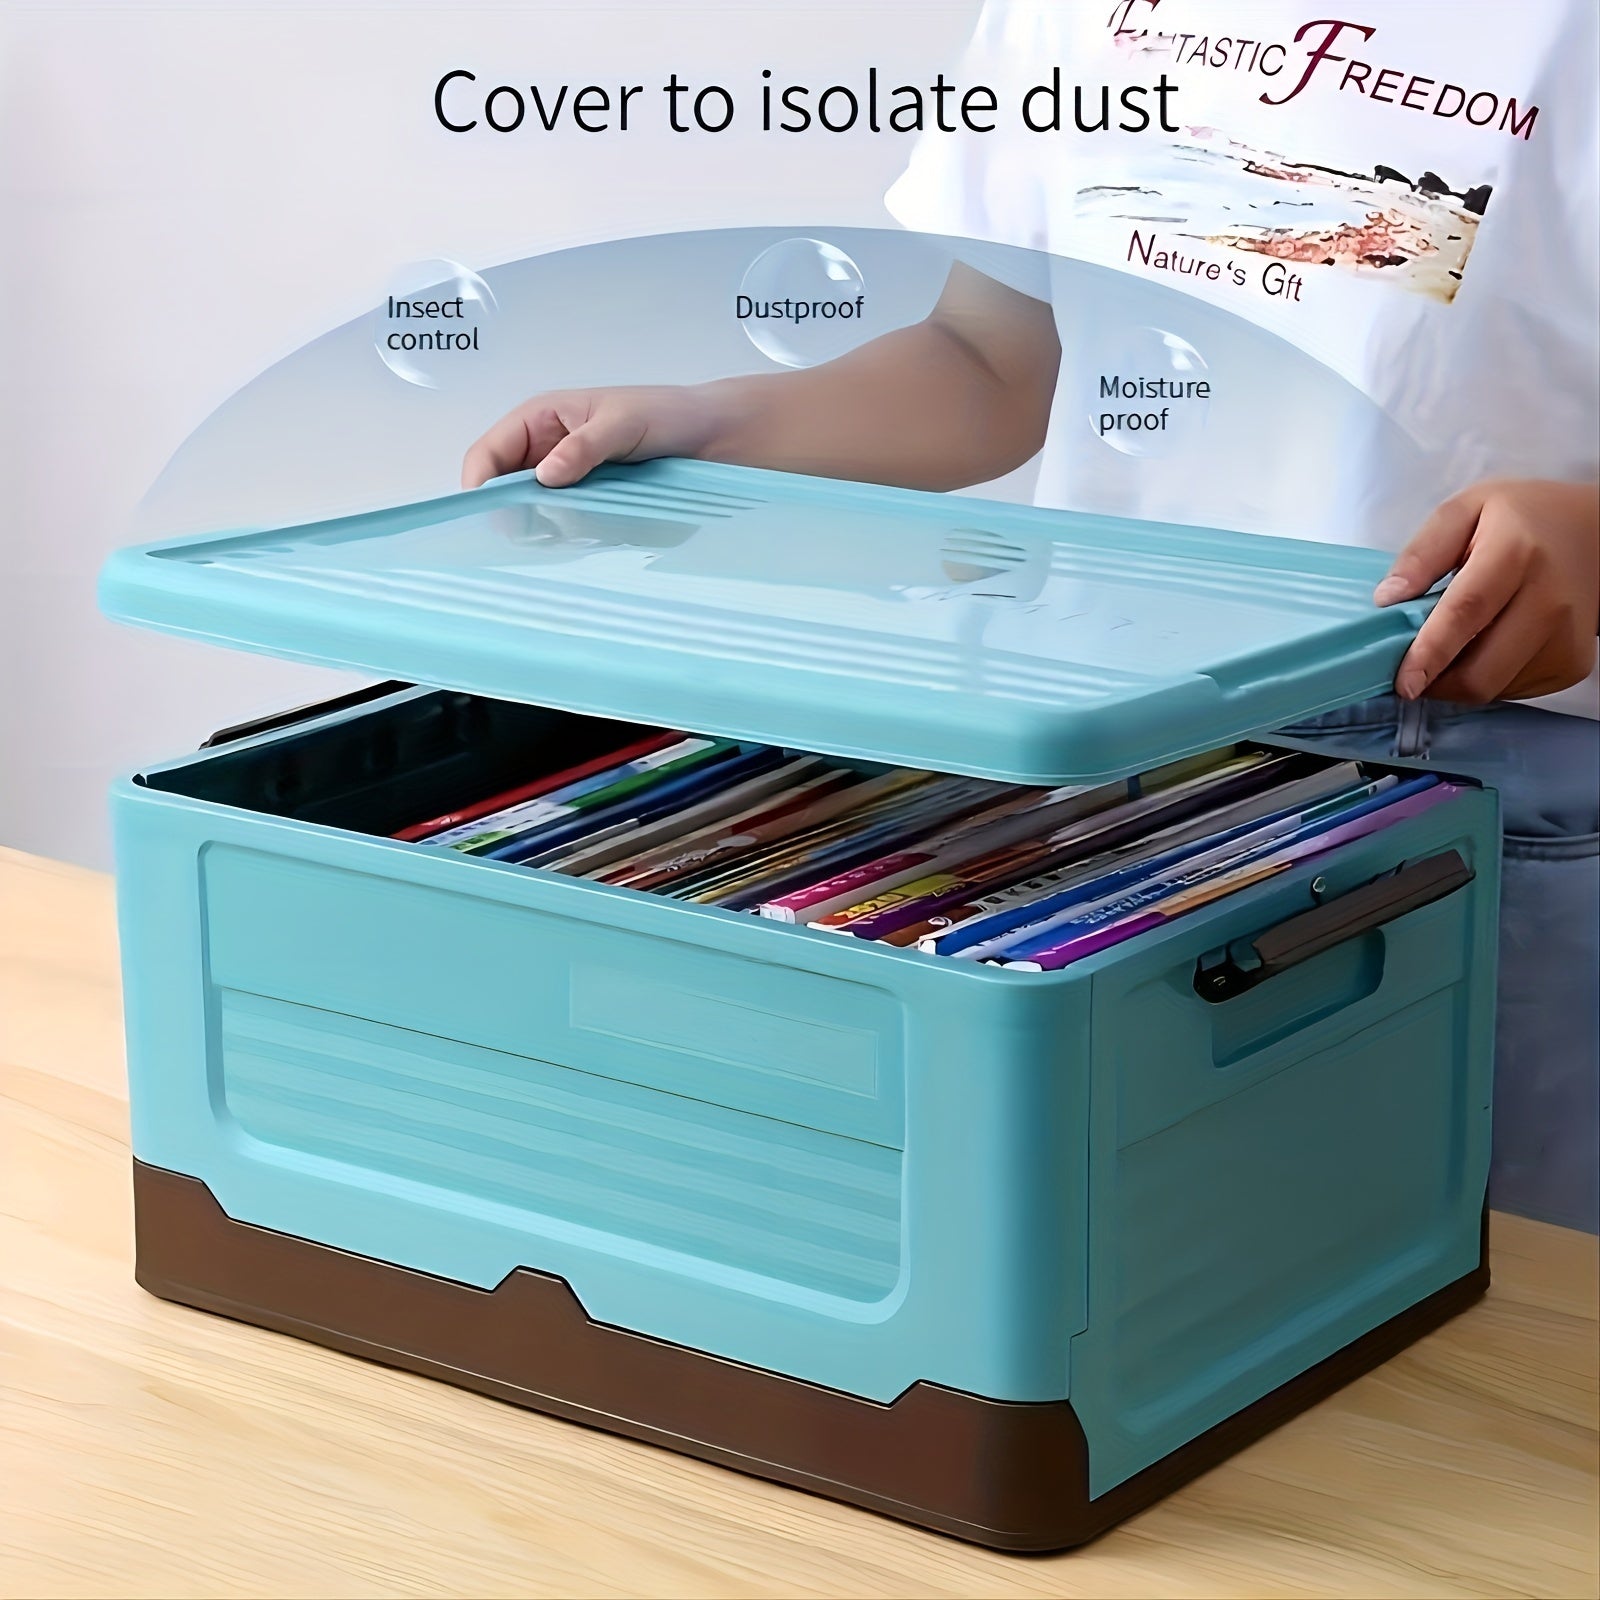 Organize Your Home with this Stylish Foldable Book Storage Box - Perfect for Clothes, Toys, Books & More! ➡ SO-00030